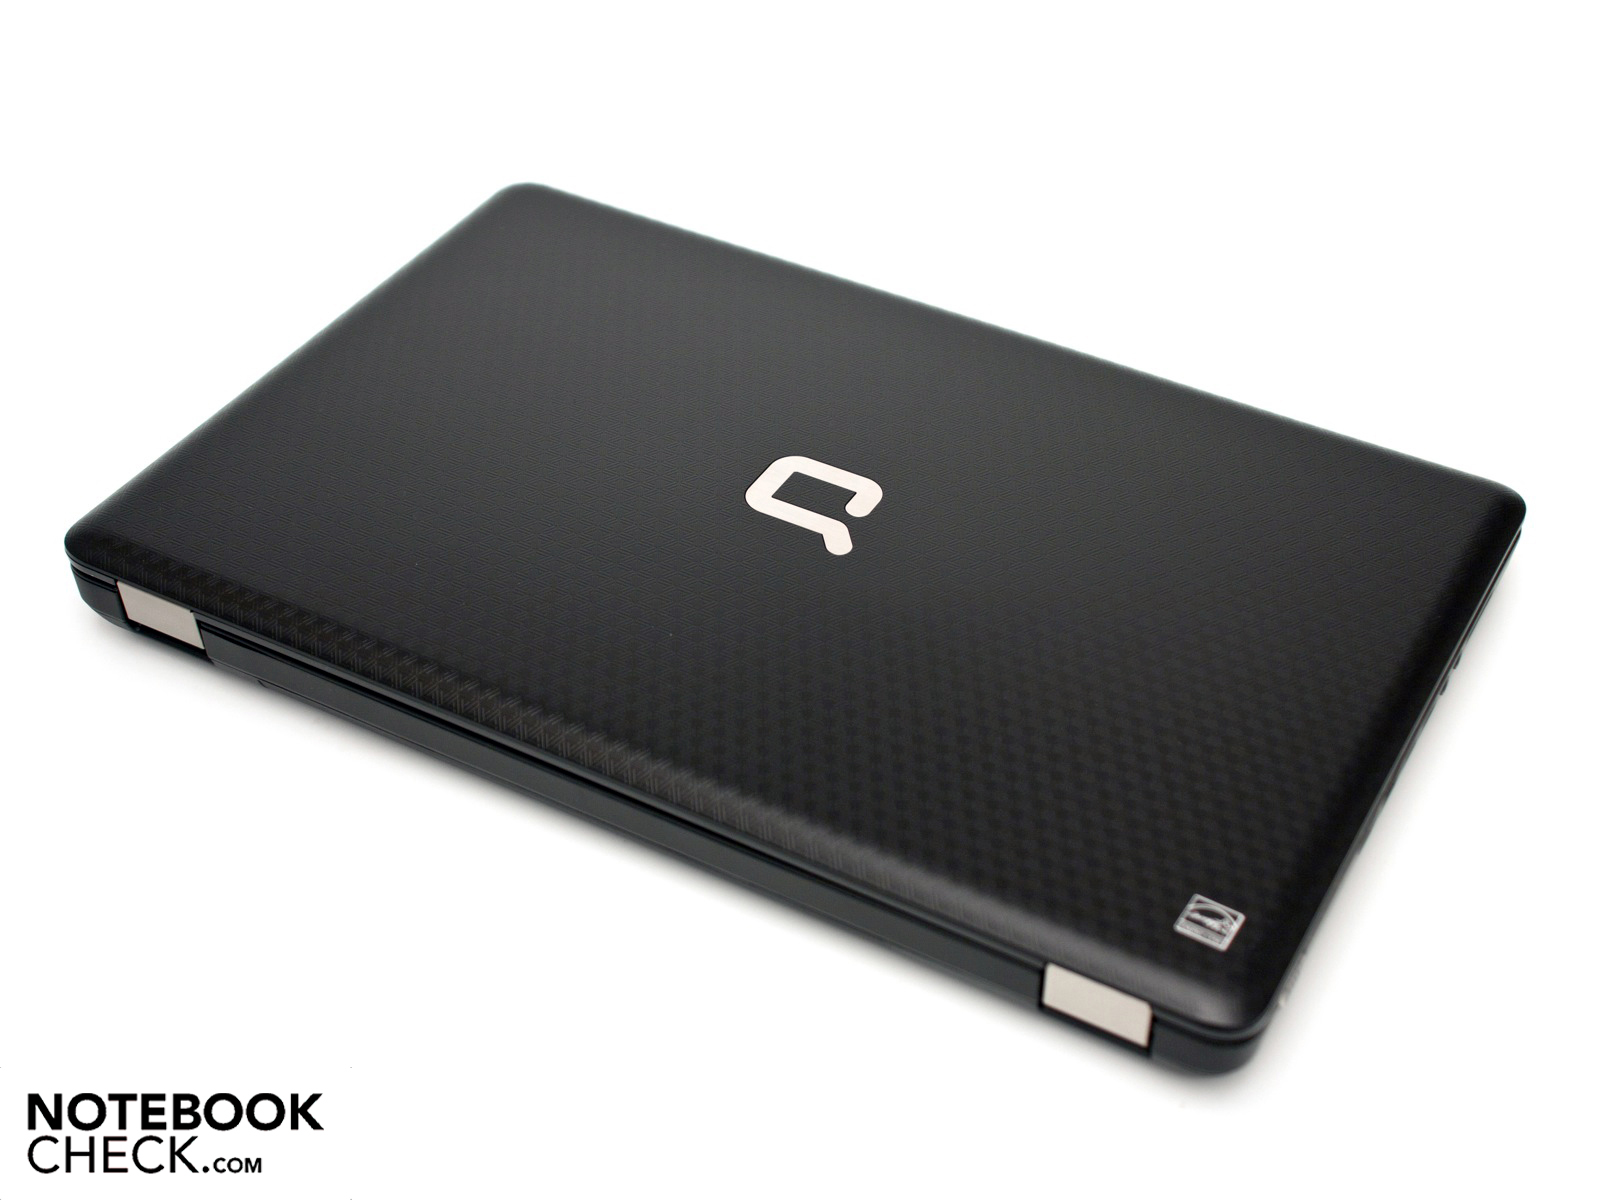 HP's Compaq Presario CQ62-A04sg is a simple office notebook without reserves for complex applications. The AMD Athlon II P320 (2x1.10 GHz) and the ATI ...